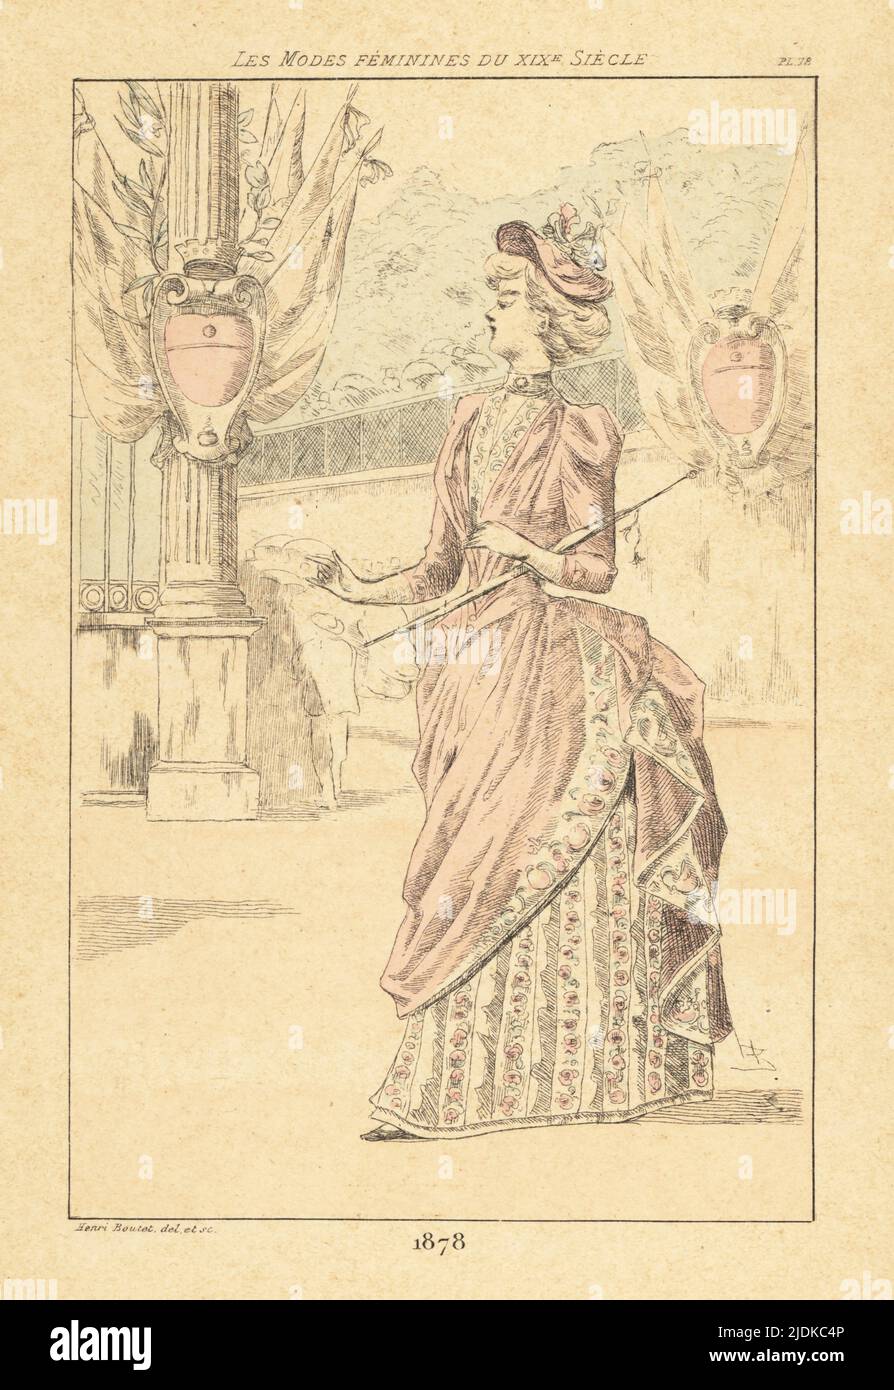 Fashionable lady at the Third Paris World's Fair, Exposition Universelle, 1878. In hat, high-collar blouse, gown with bustle and embroidered petticoats. Gates decorated with shields and flags. Handcoloured drypoint or pointe-seche etching by Henri Boutet from Les Modes Feminines du XIXeme Siecle (Feminine Fashions of the 19th Century), Ernest Flammarion, Paris, 1902. Boutet (1851-1919) was a French artist, engraver, lithographer and designer. Stock Photo